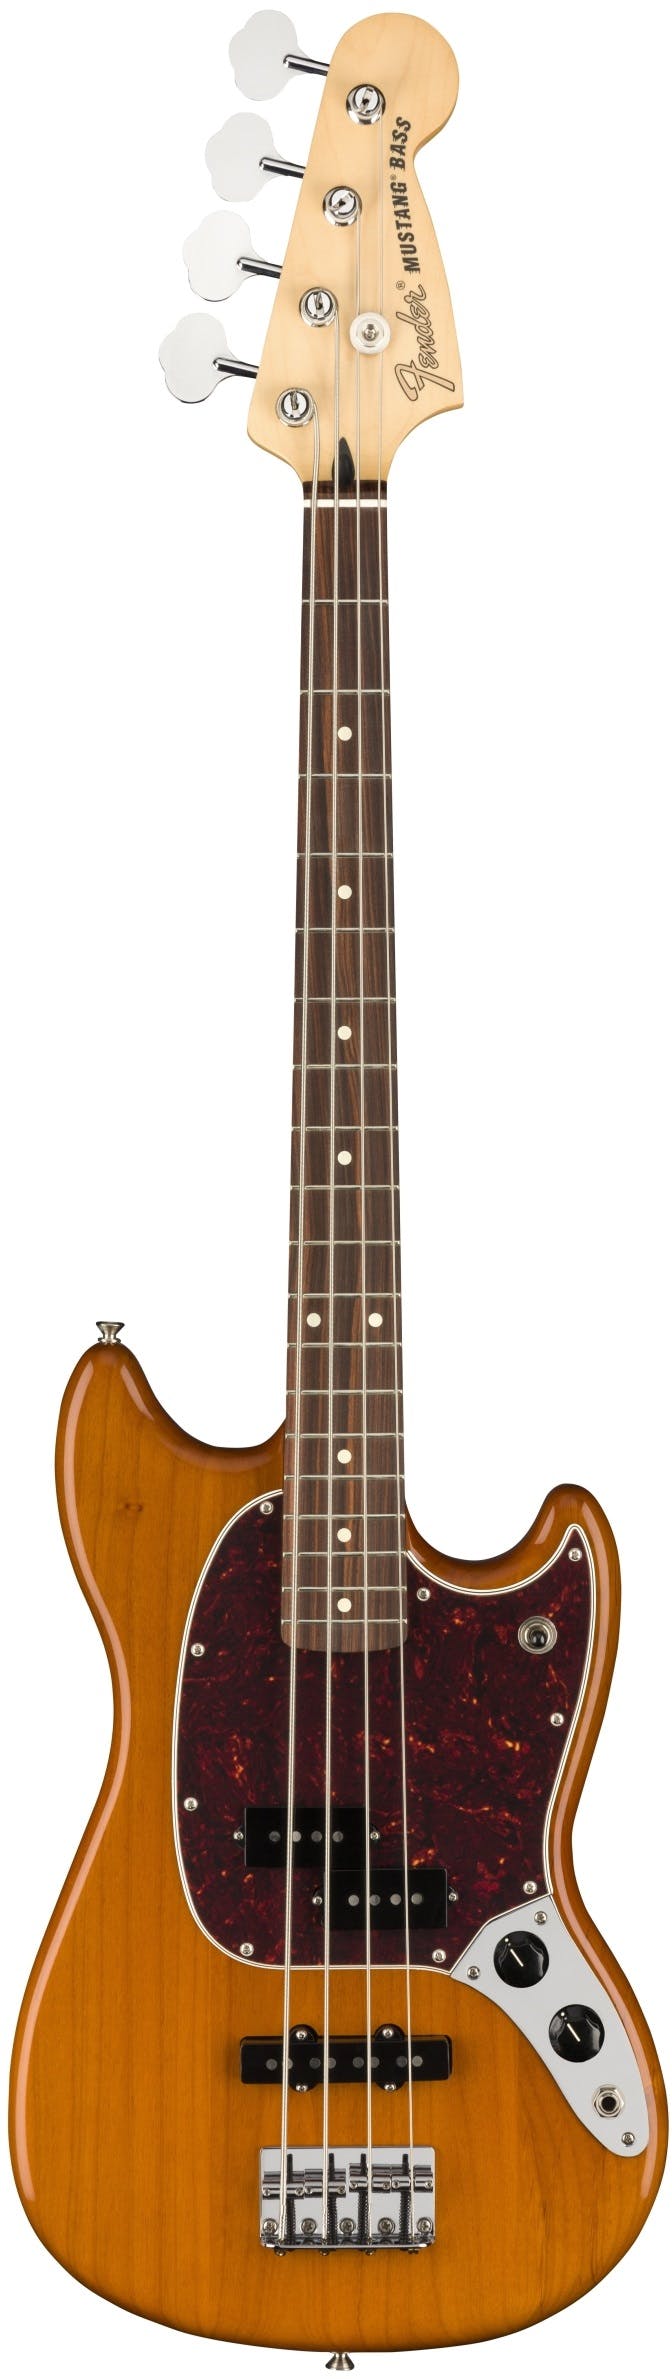 Fender Player Mustang Bass PJ in Aged Natural - Andertons Music Co.